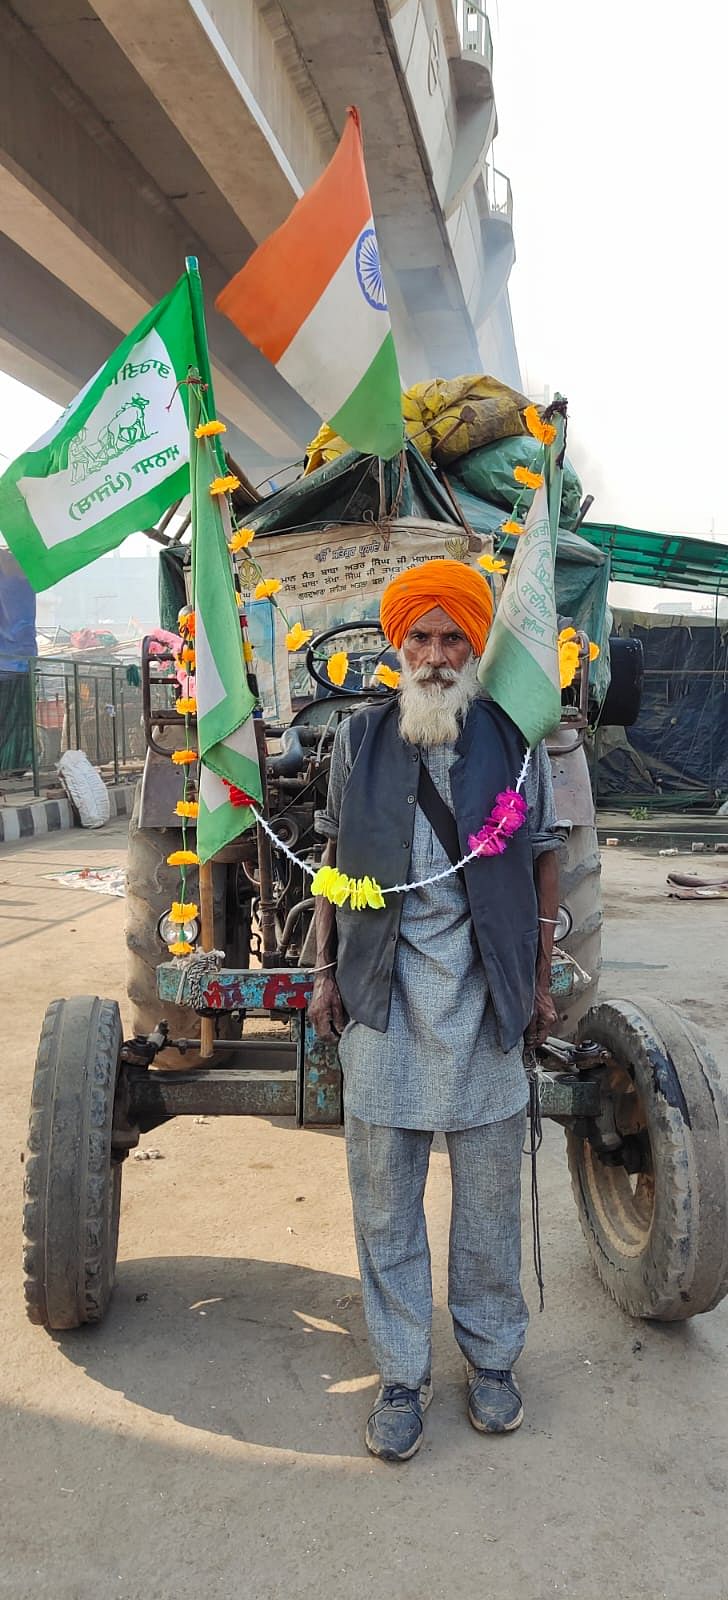 Farmers end their 15-month long protest and head back to their homes.